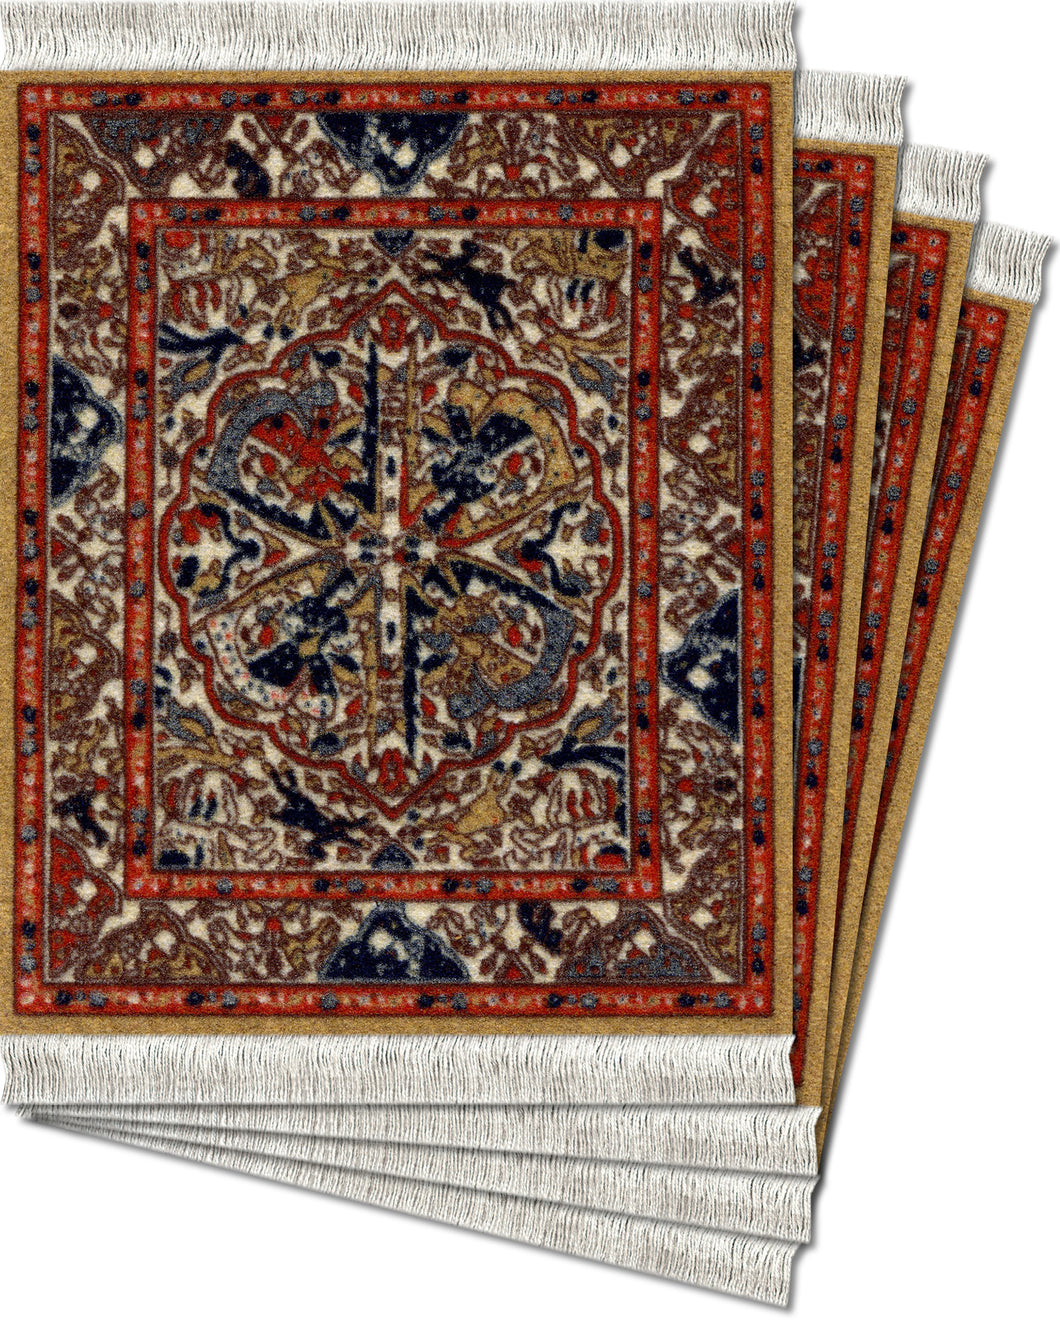 Dusty Gold Ancient Oriental Coaster Rug Set